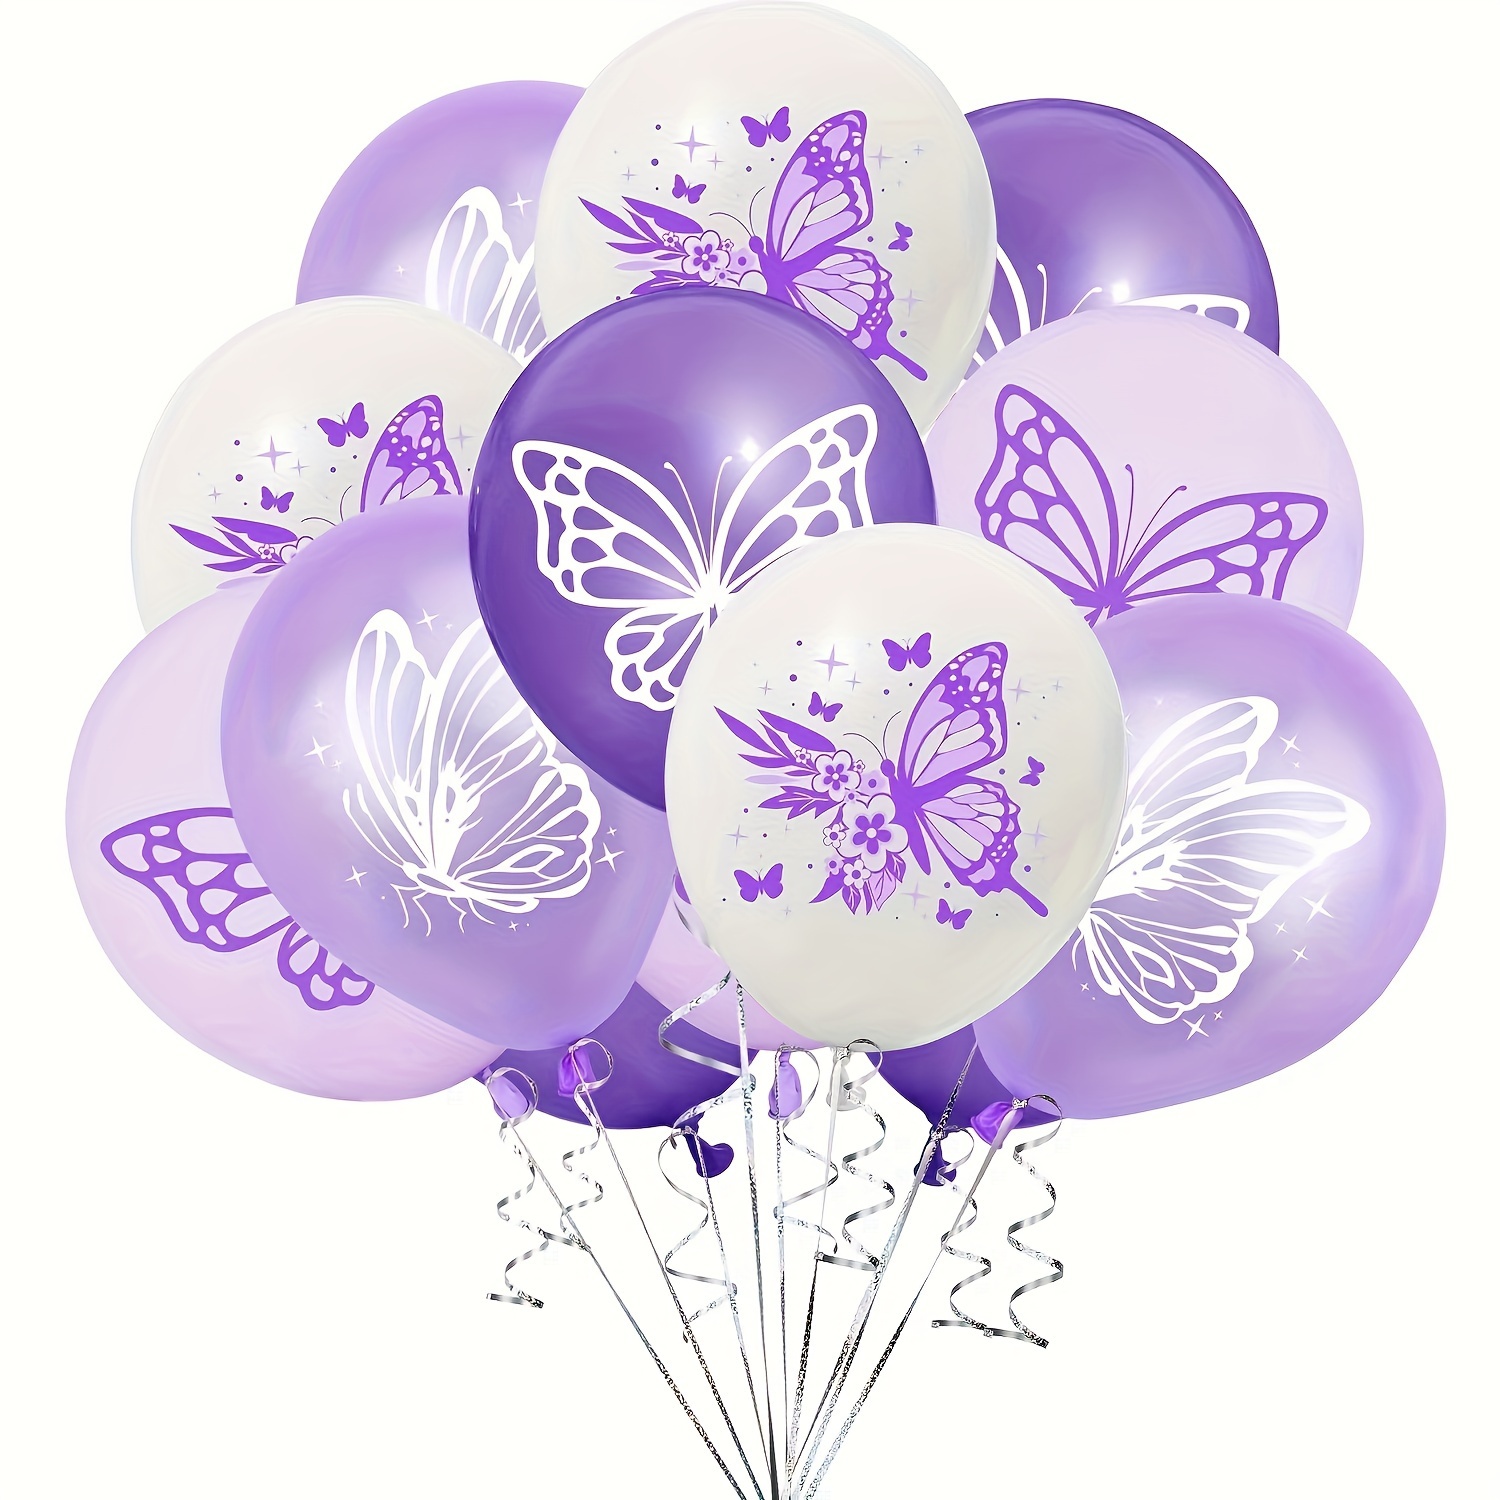 

20-pack Butterfly Printed Latex Balloons For Parties - Versatile Decorations For Birthdays, Weddings, Anniversaries, Graduations, Valentine's, Indoor & Outdoor Events, Suitable For Ages 3-12